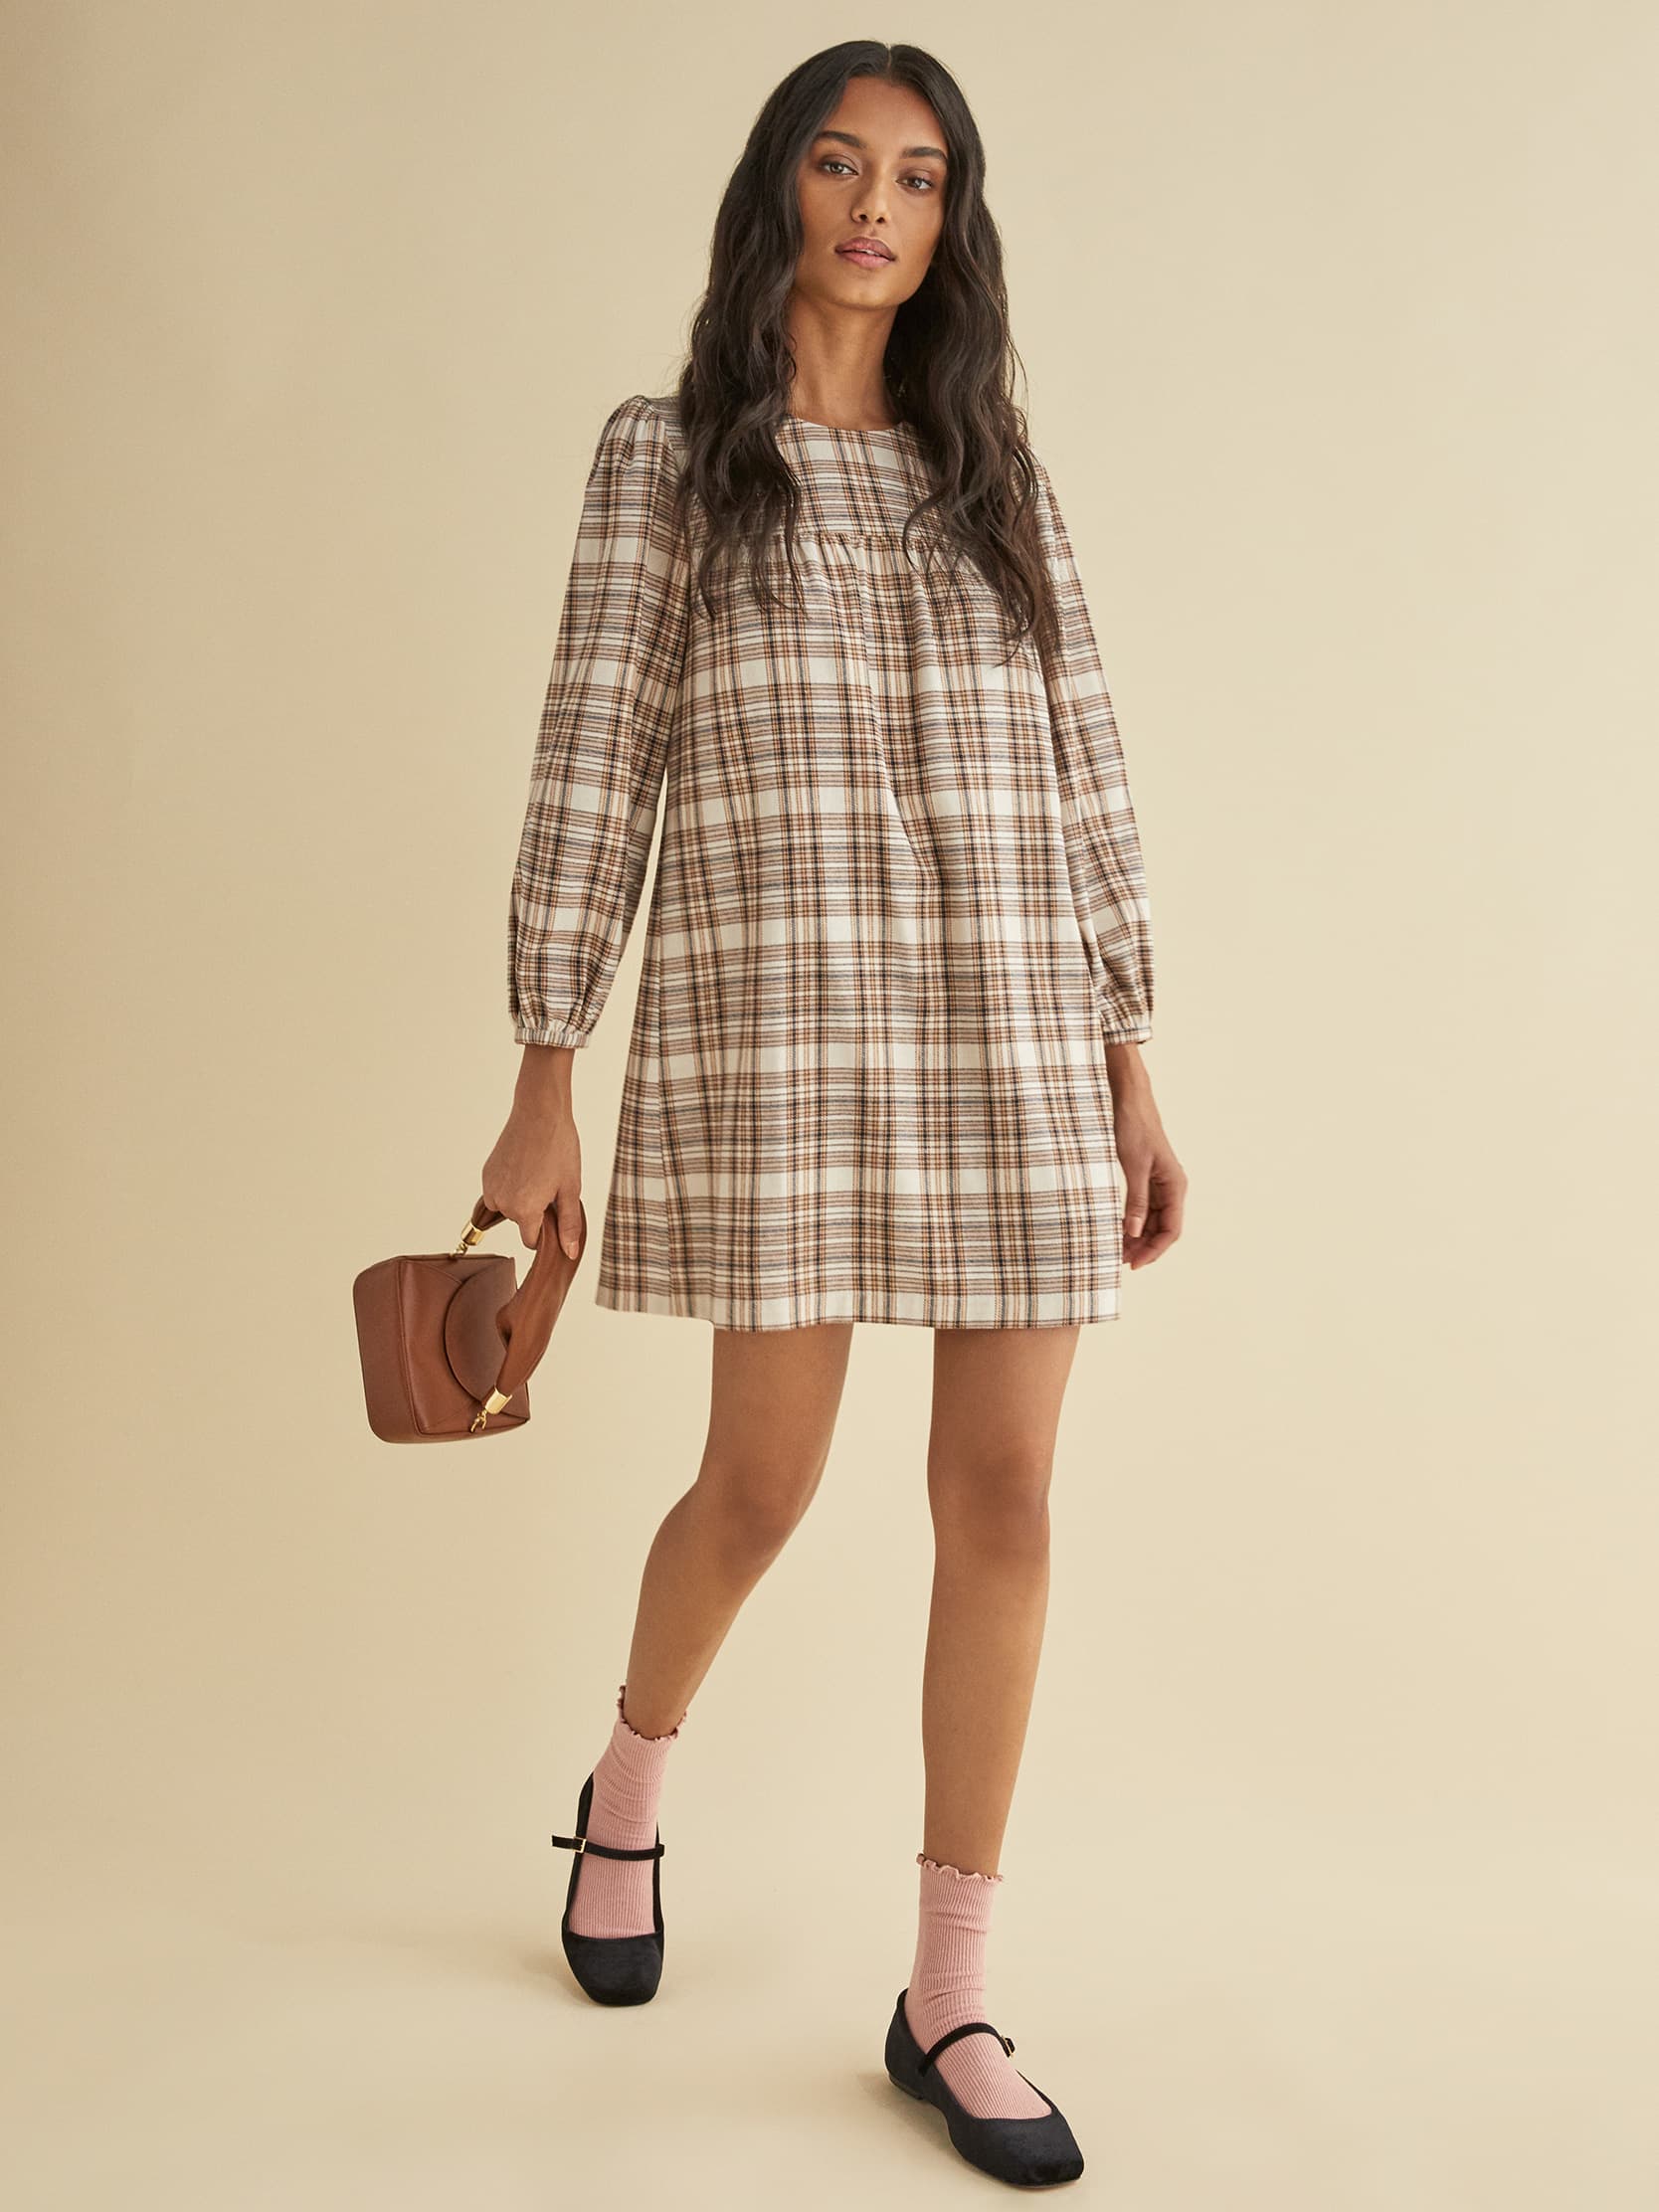 reformation anise dress